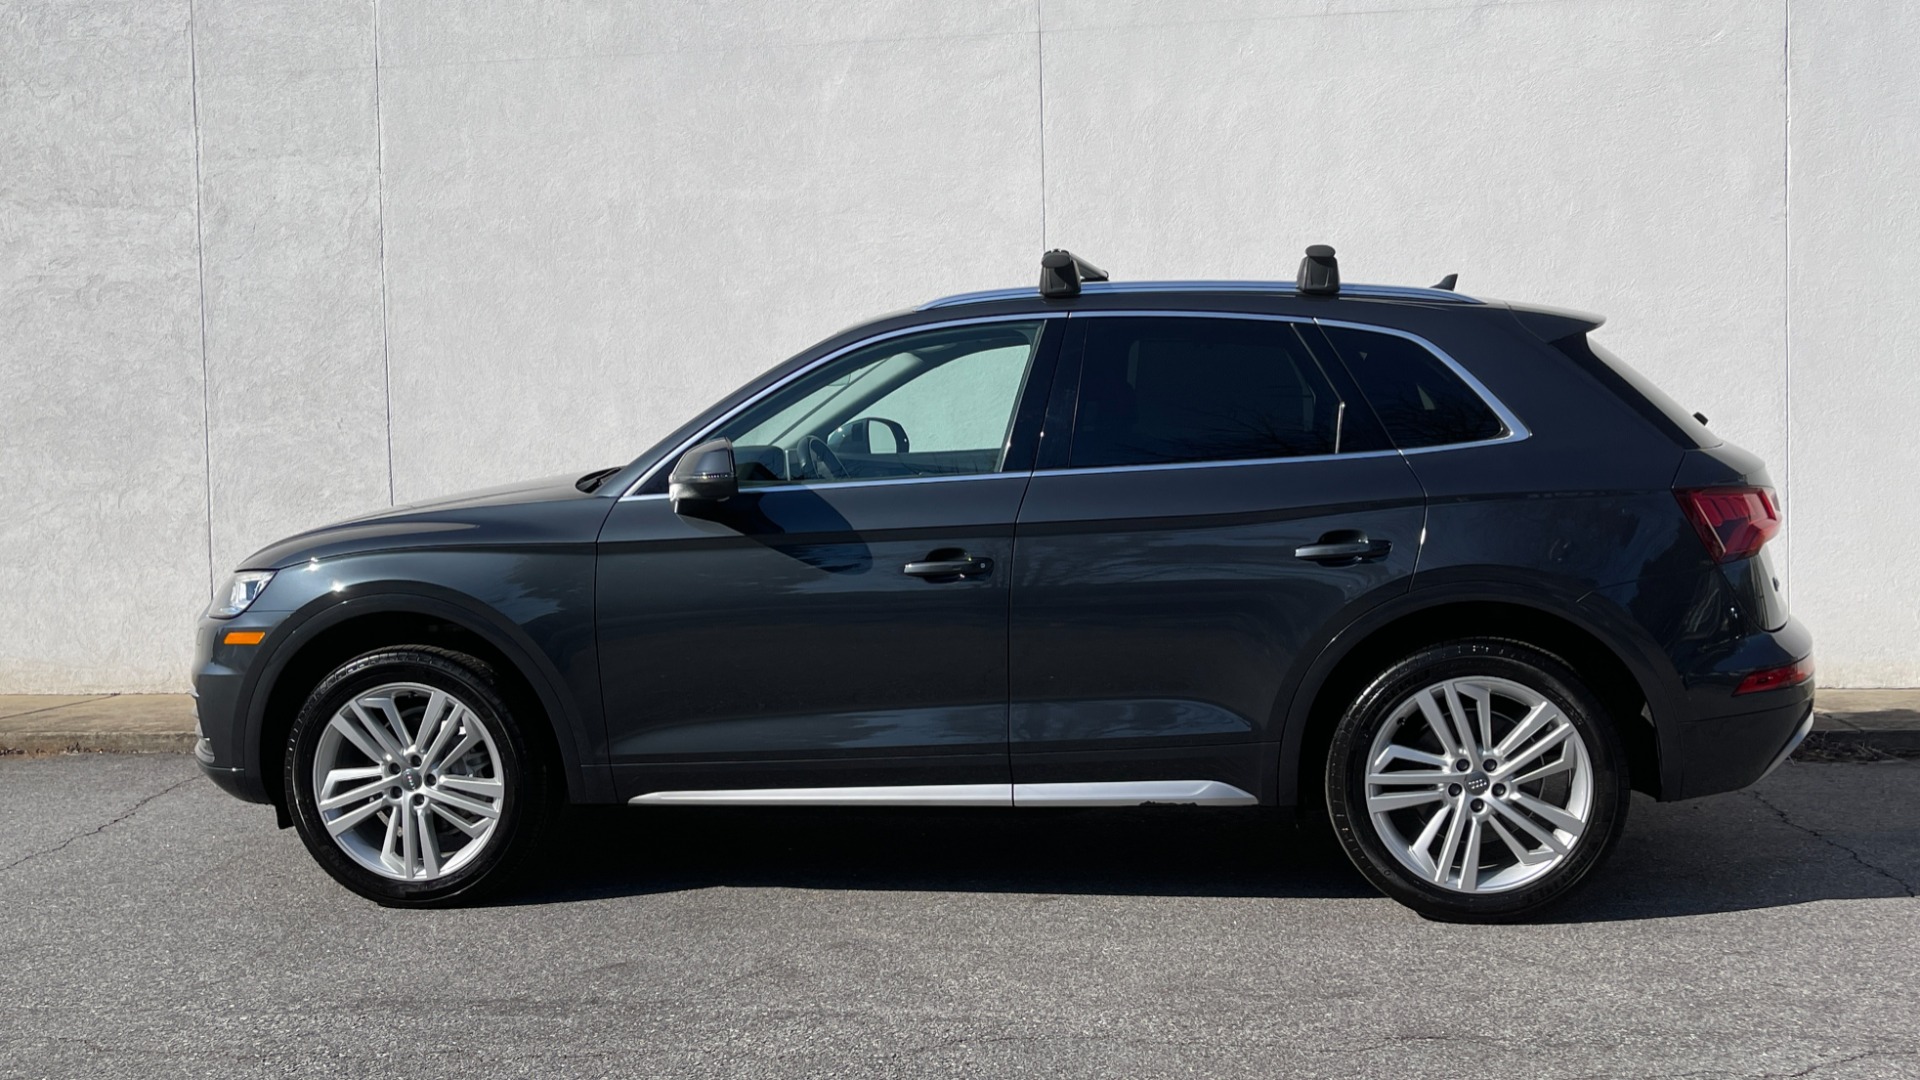 Used 2019 Audi Q5 PREMIUM PLUS / NAV / SUNROOF / WARM WTHR / PARK SYS PLUS / REARVIEW for sale $40,495 at Formula Imports in Charlotte NC 28227 3